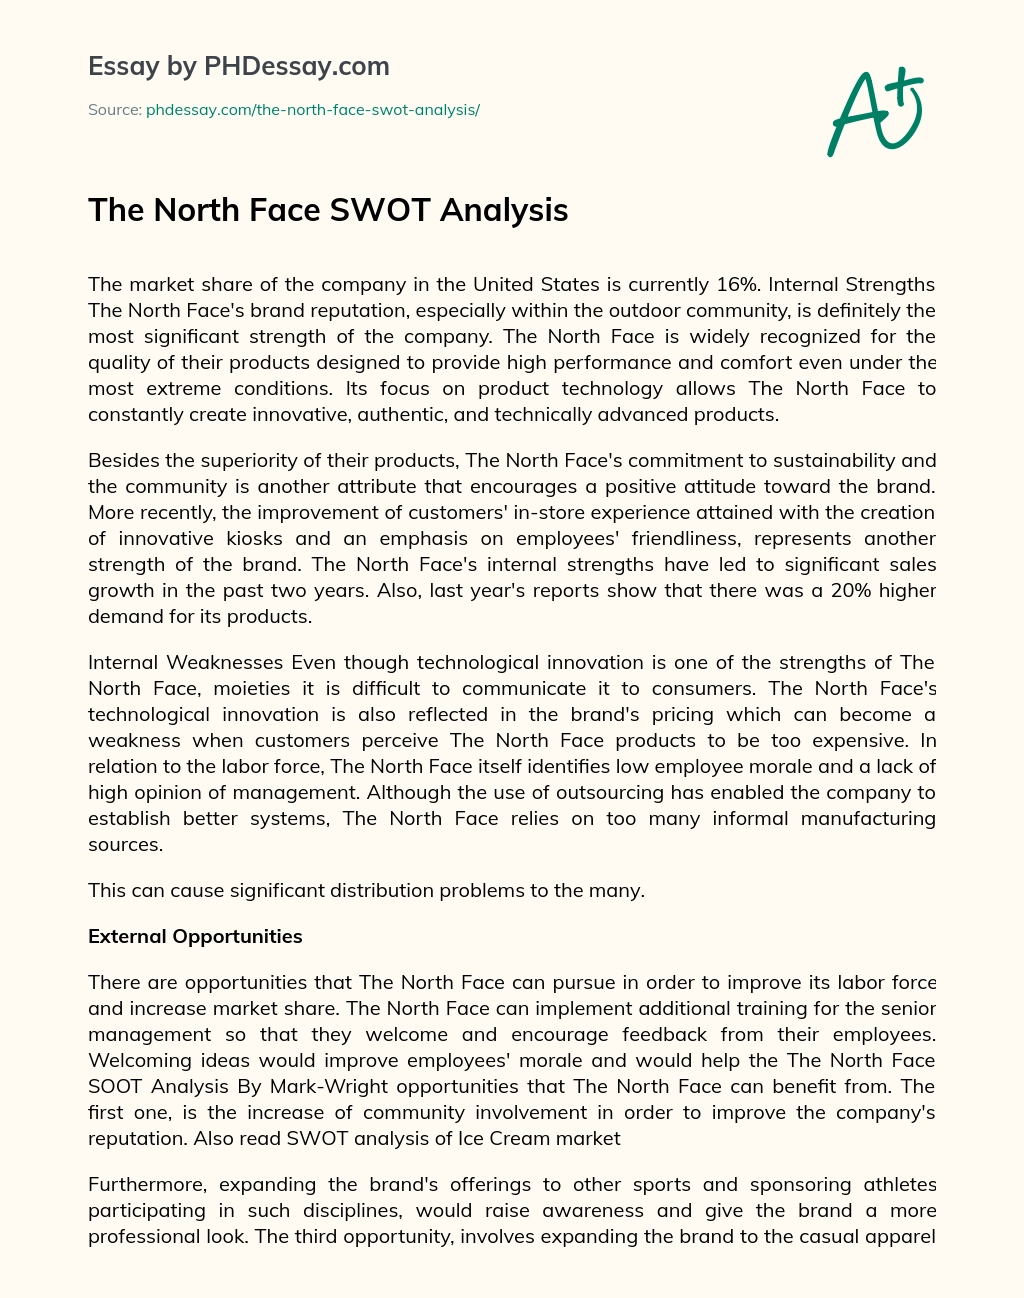 The North Face SWOT Analysis essay